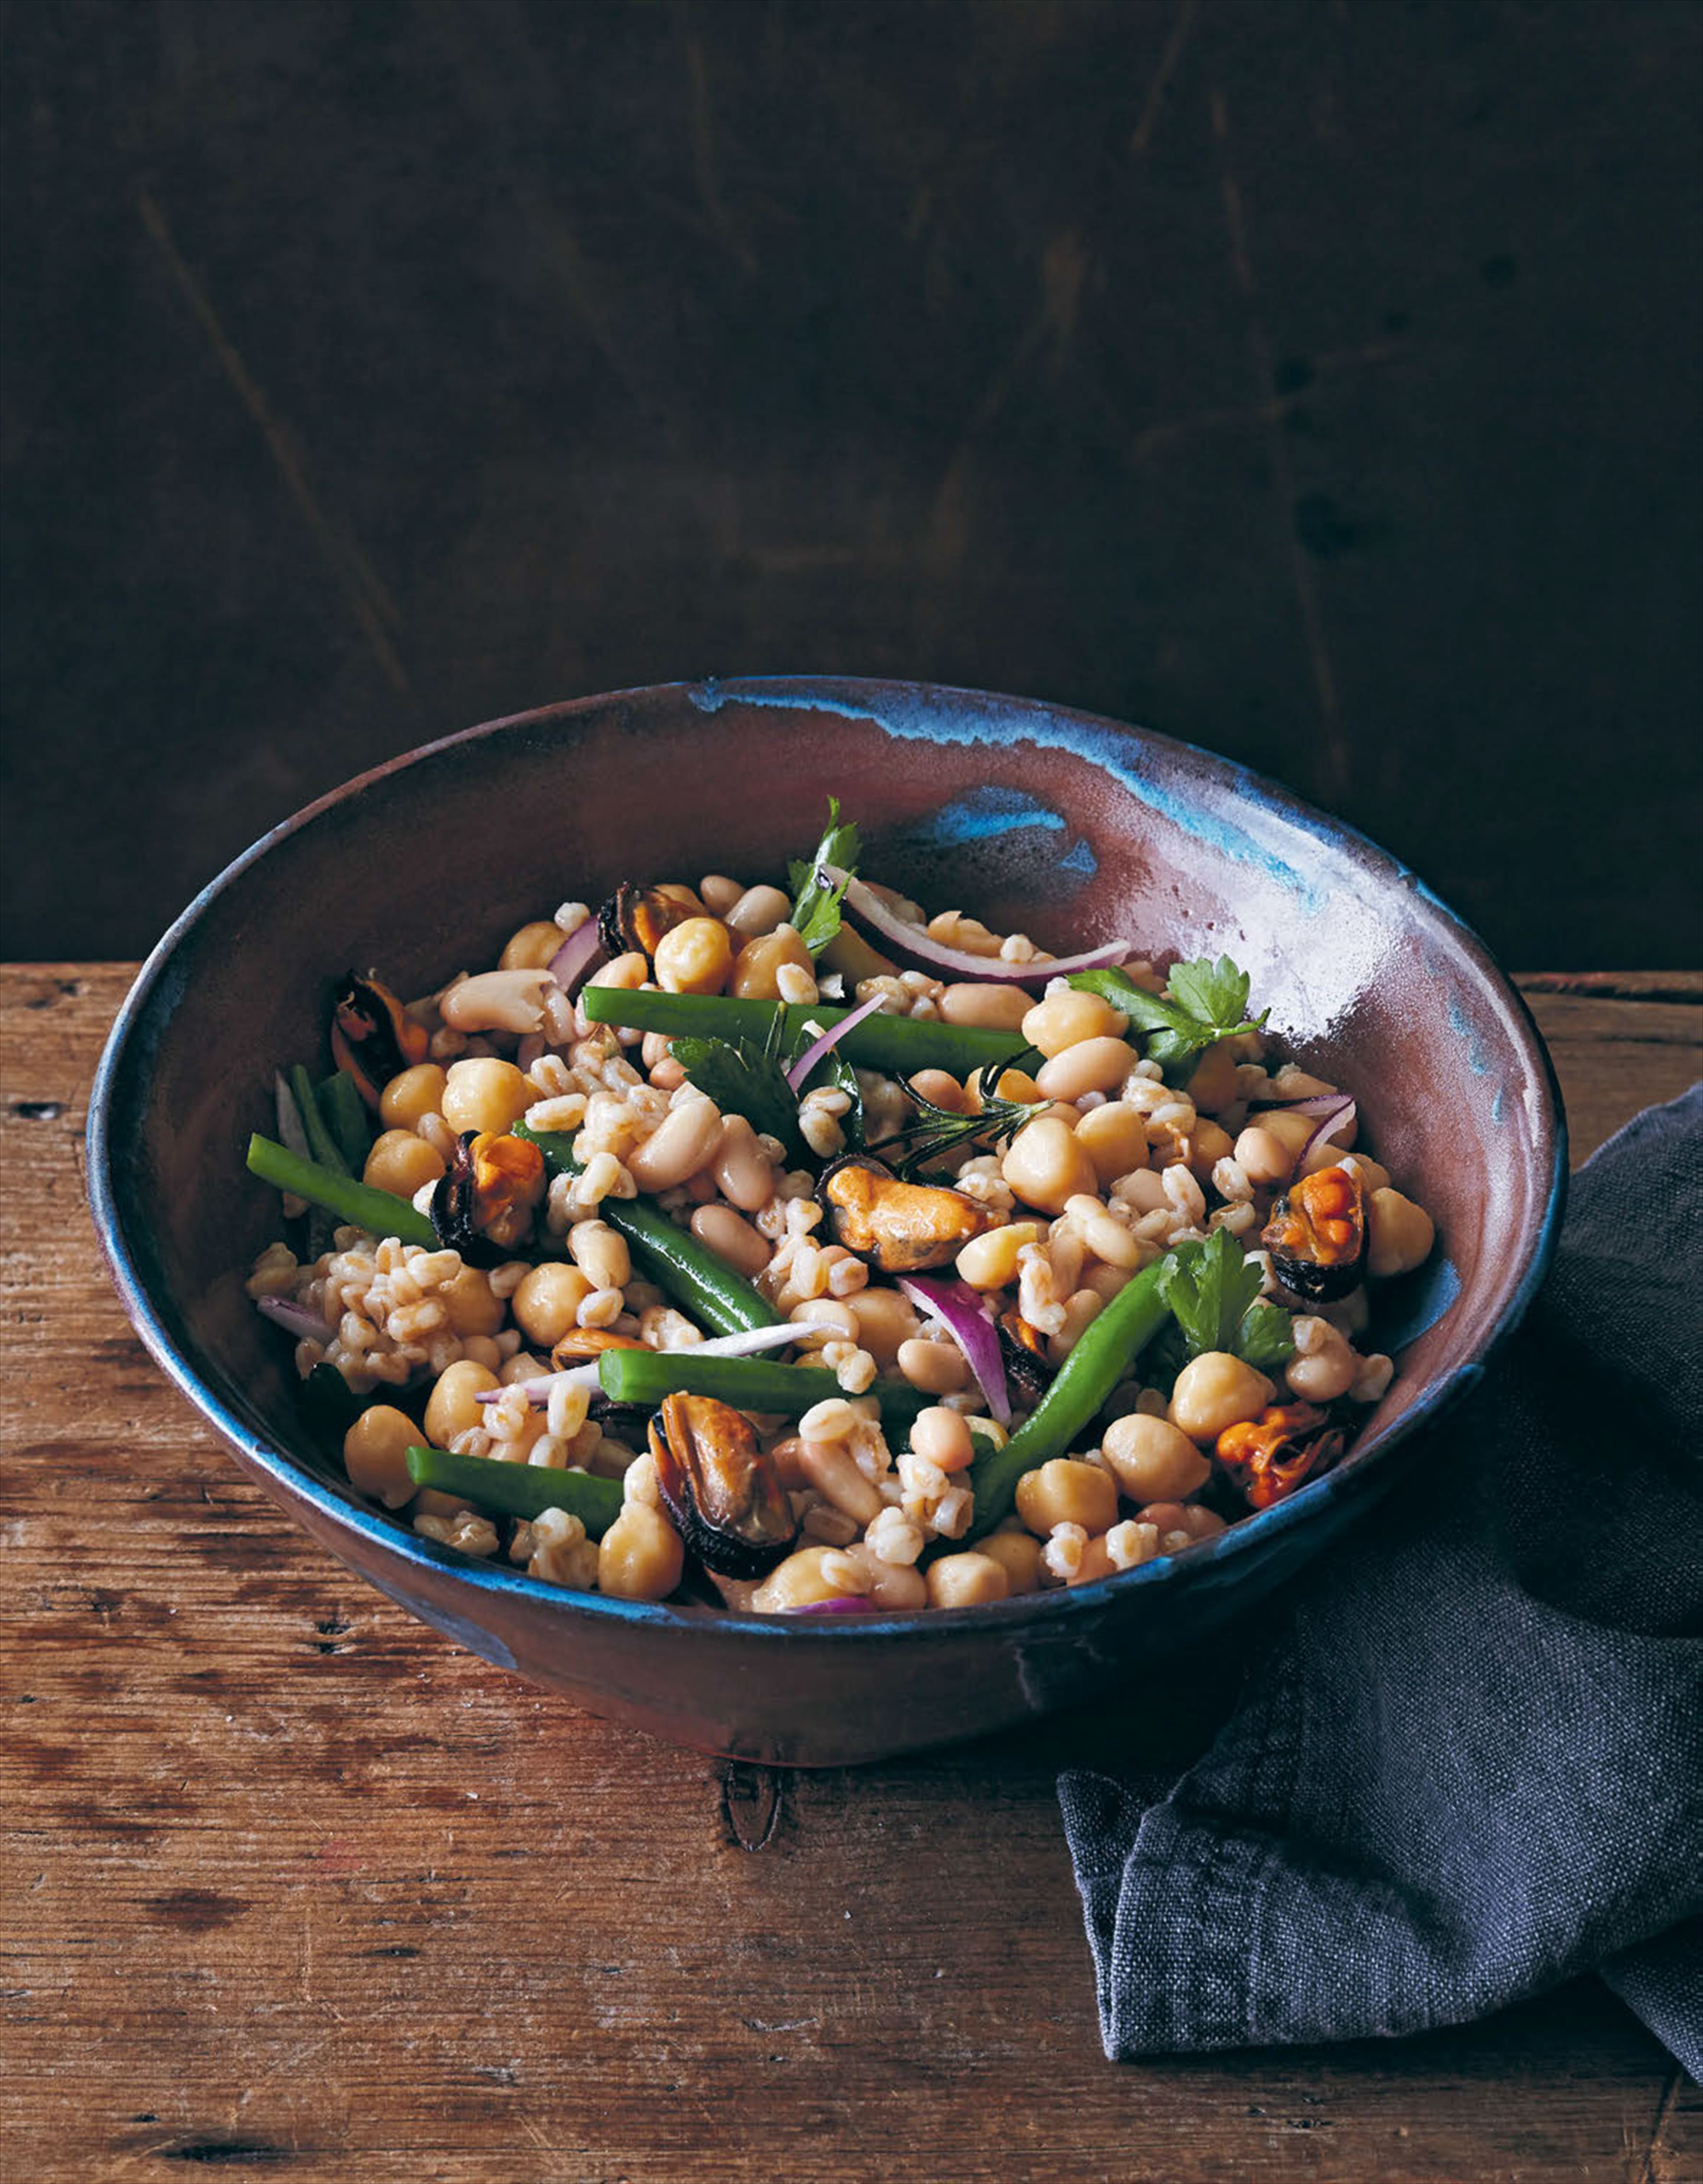 Farro with beans, chickpeas and mussels